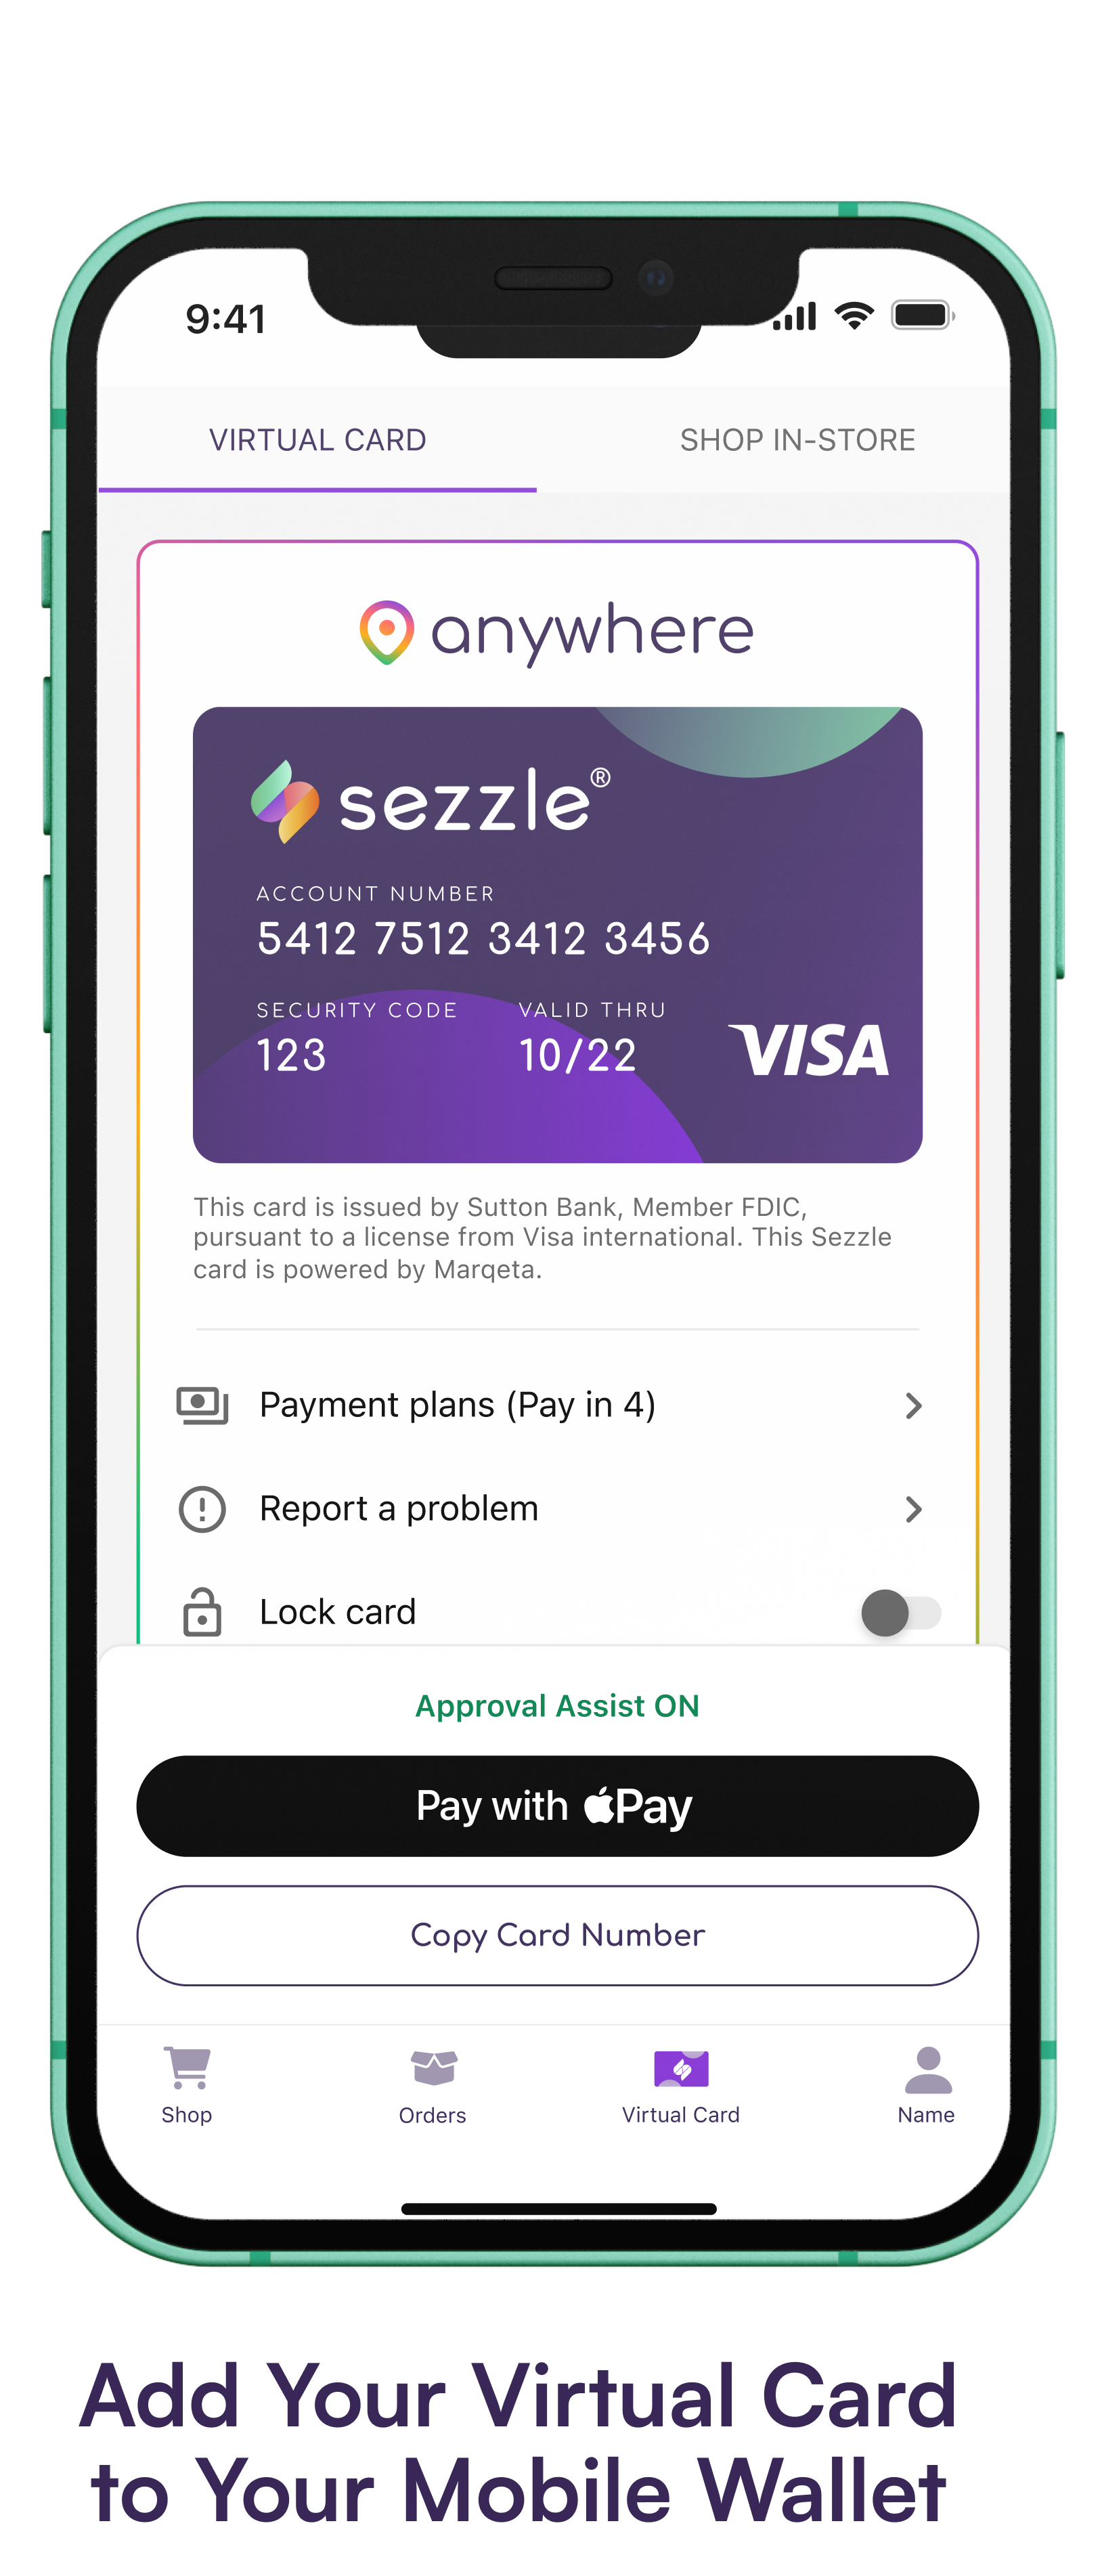 Phone screen showing Sezzle Virtual Card in Sezzle app.